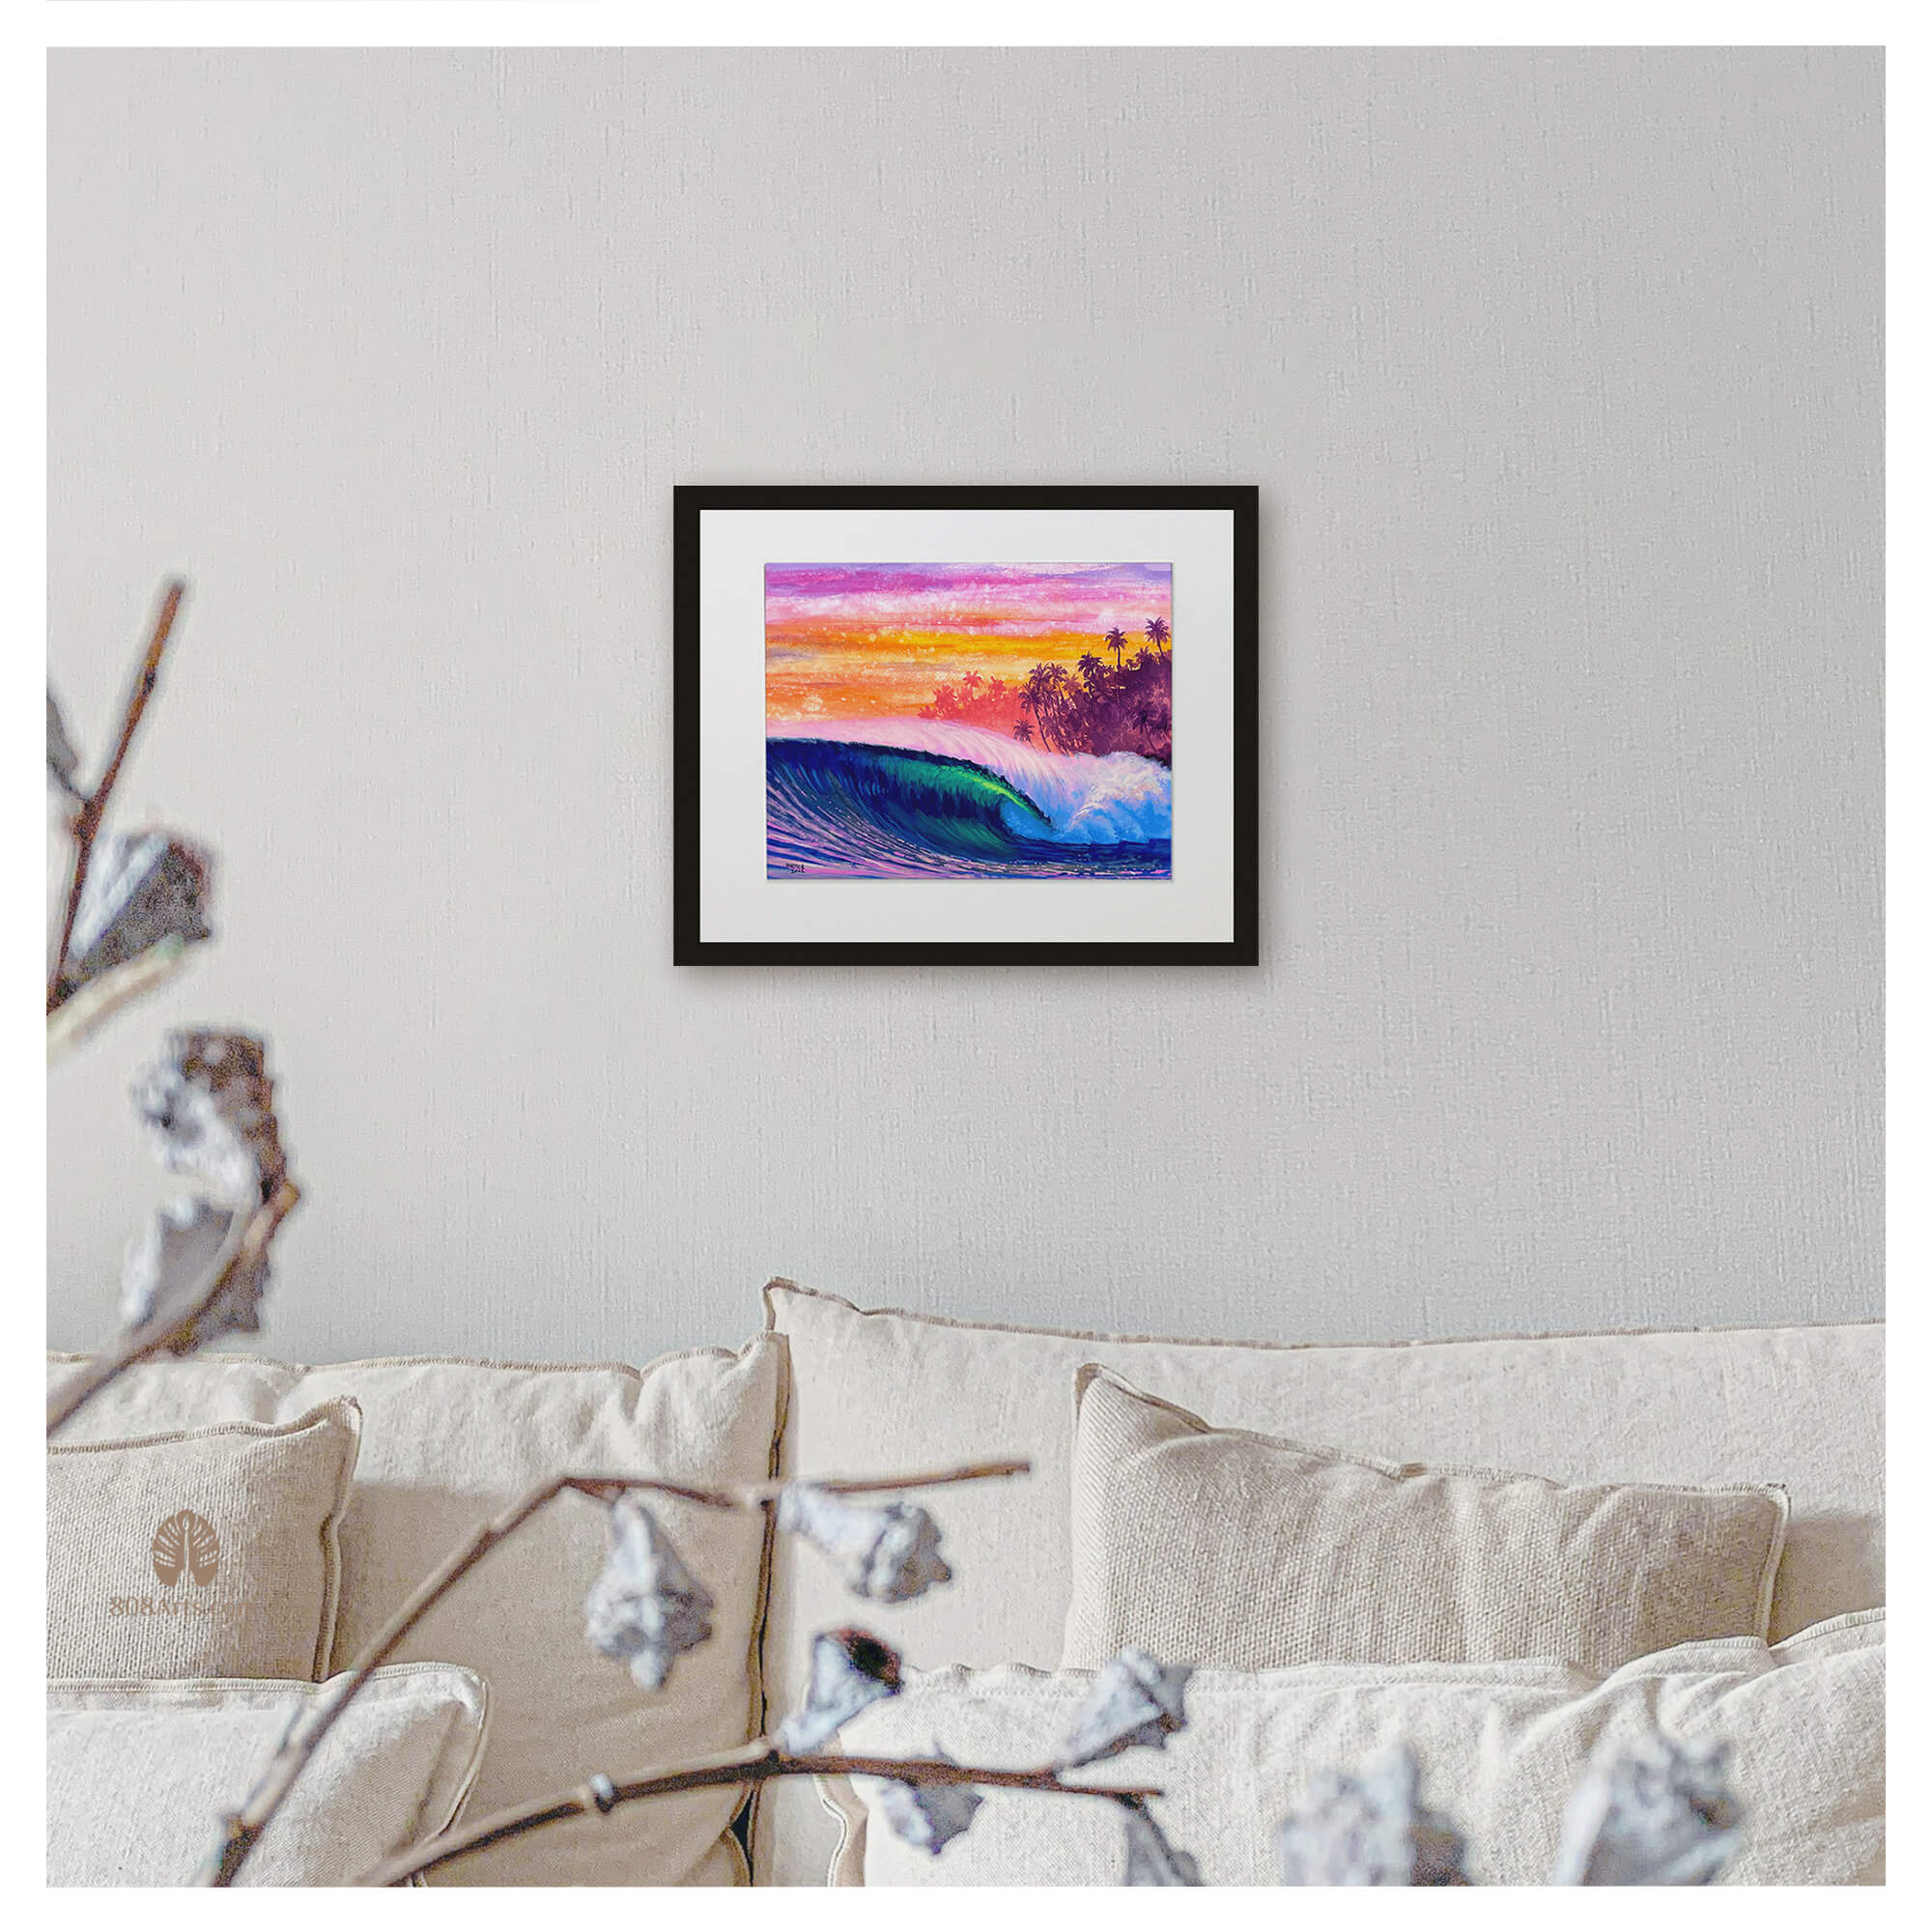 Vibrant colored wave and pastel colored sunset by Hawaii artist Patrick Parker